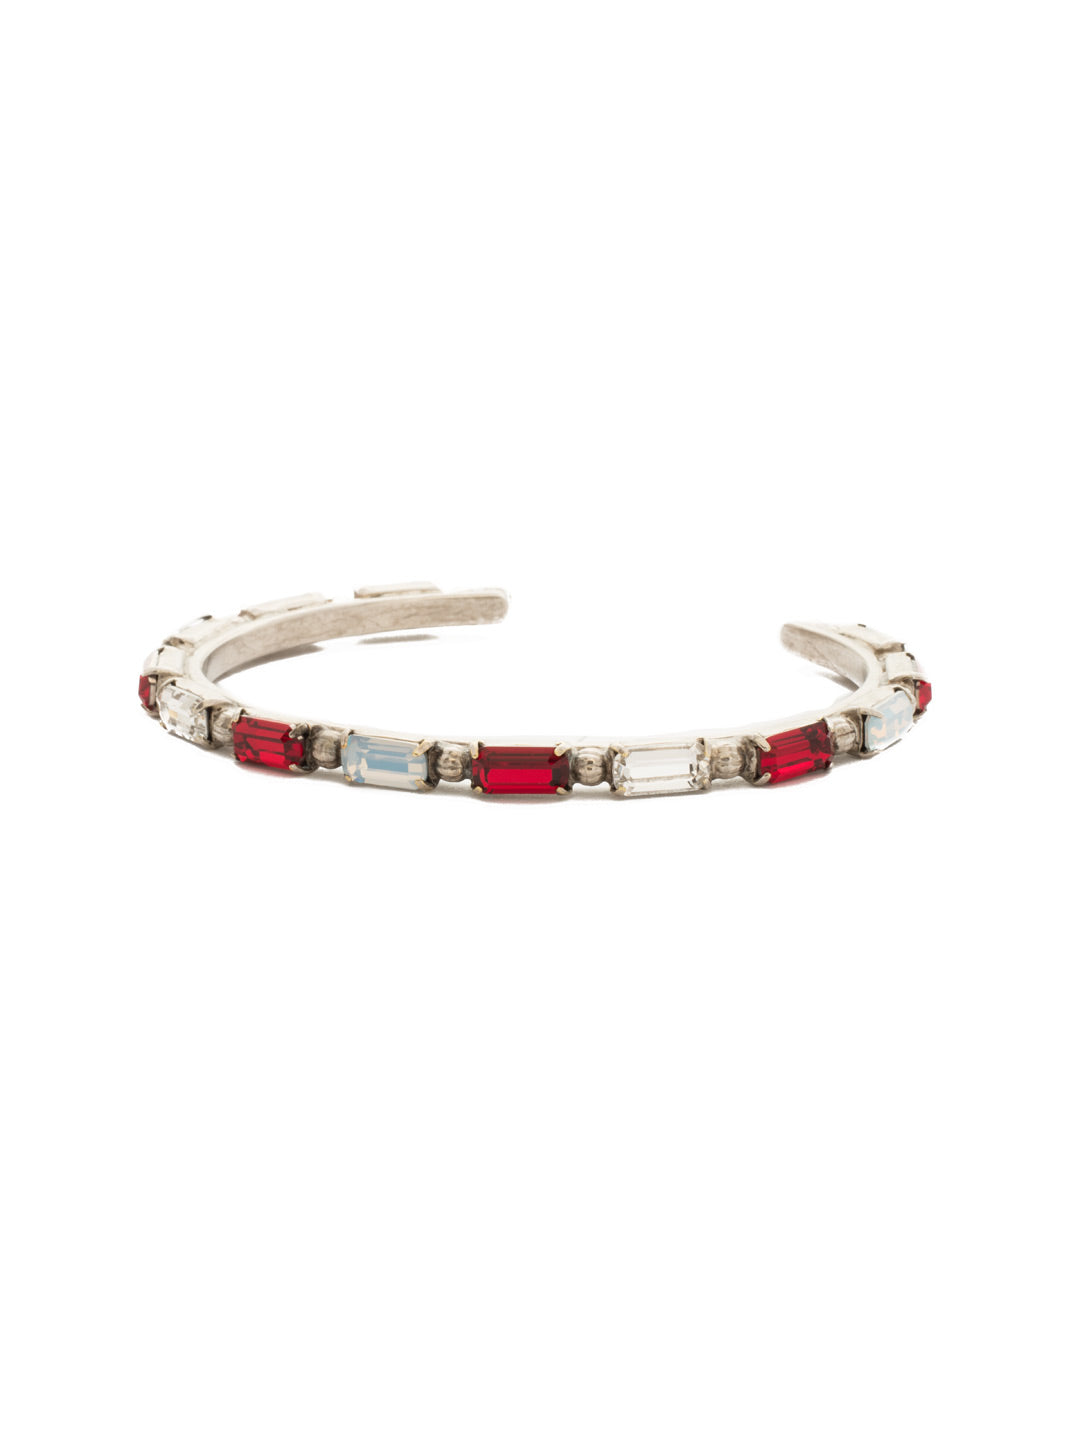 Boho Baguette Cuff Bracelet - BDU50ASCP - <p>This cuff bracelet features repeating crystal baguettes and metal ball details. From Sorrelli's Crimson Pride collection in our Antique Silver-tone finish.</p>